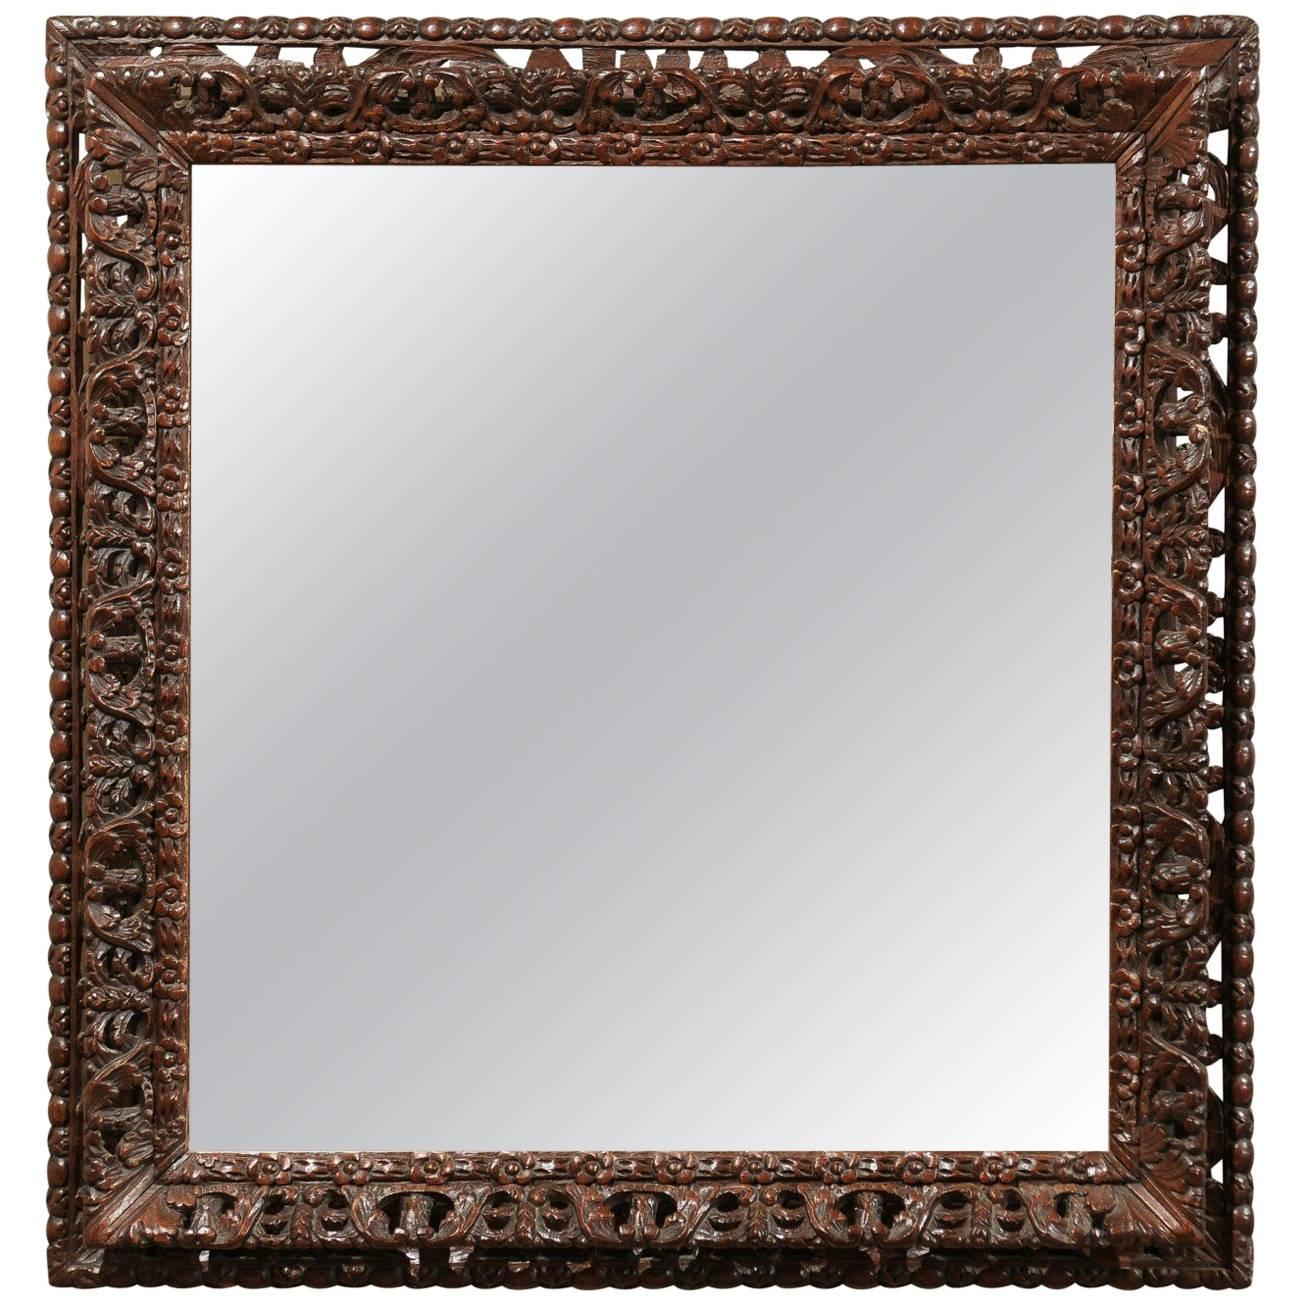 Early 20th Century Black Forest Mirror, circa 1900 For Sale